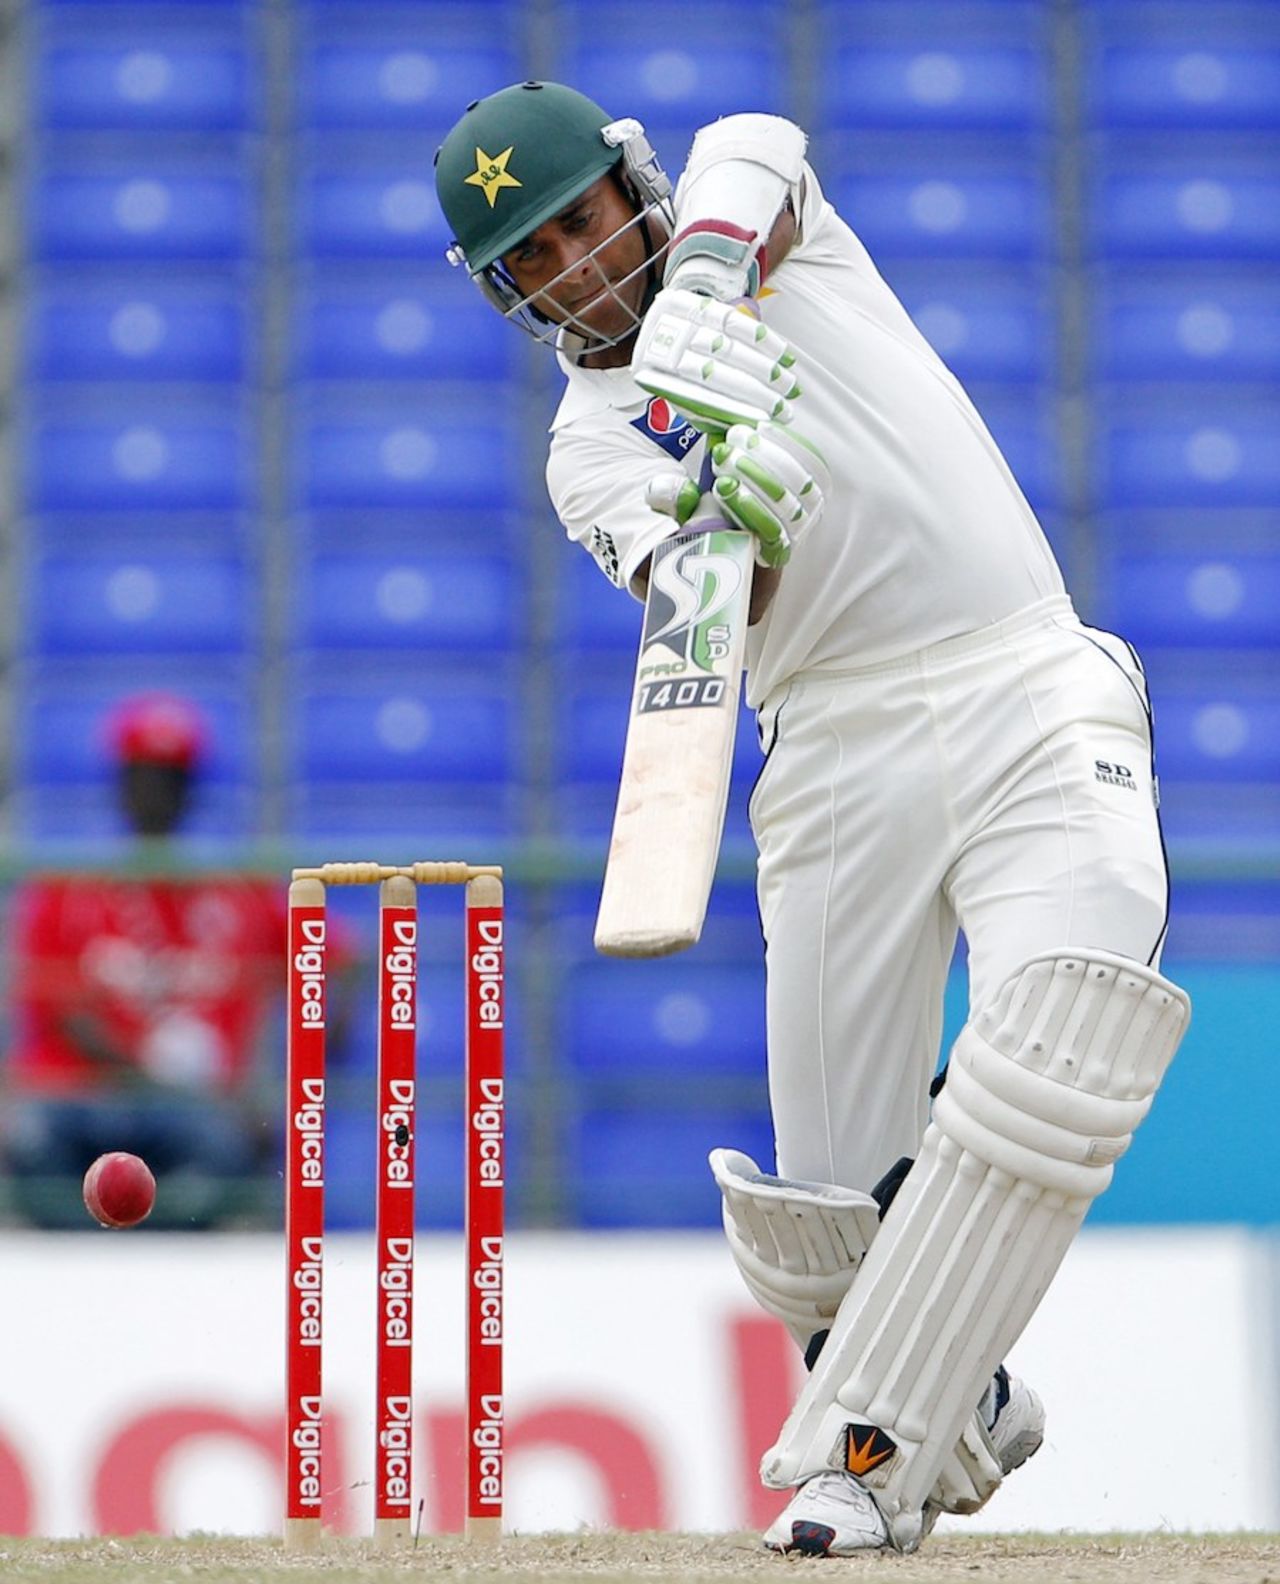 Tanvir Ahmed goes on the attack, West Indies v Pakistan, 2nd Test, St Kitts, 2nd day, May 21, 2011